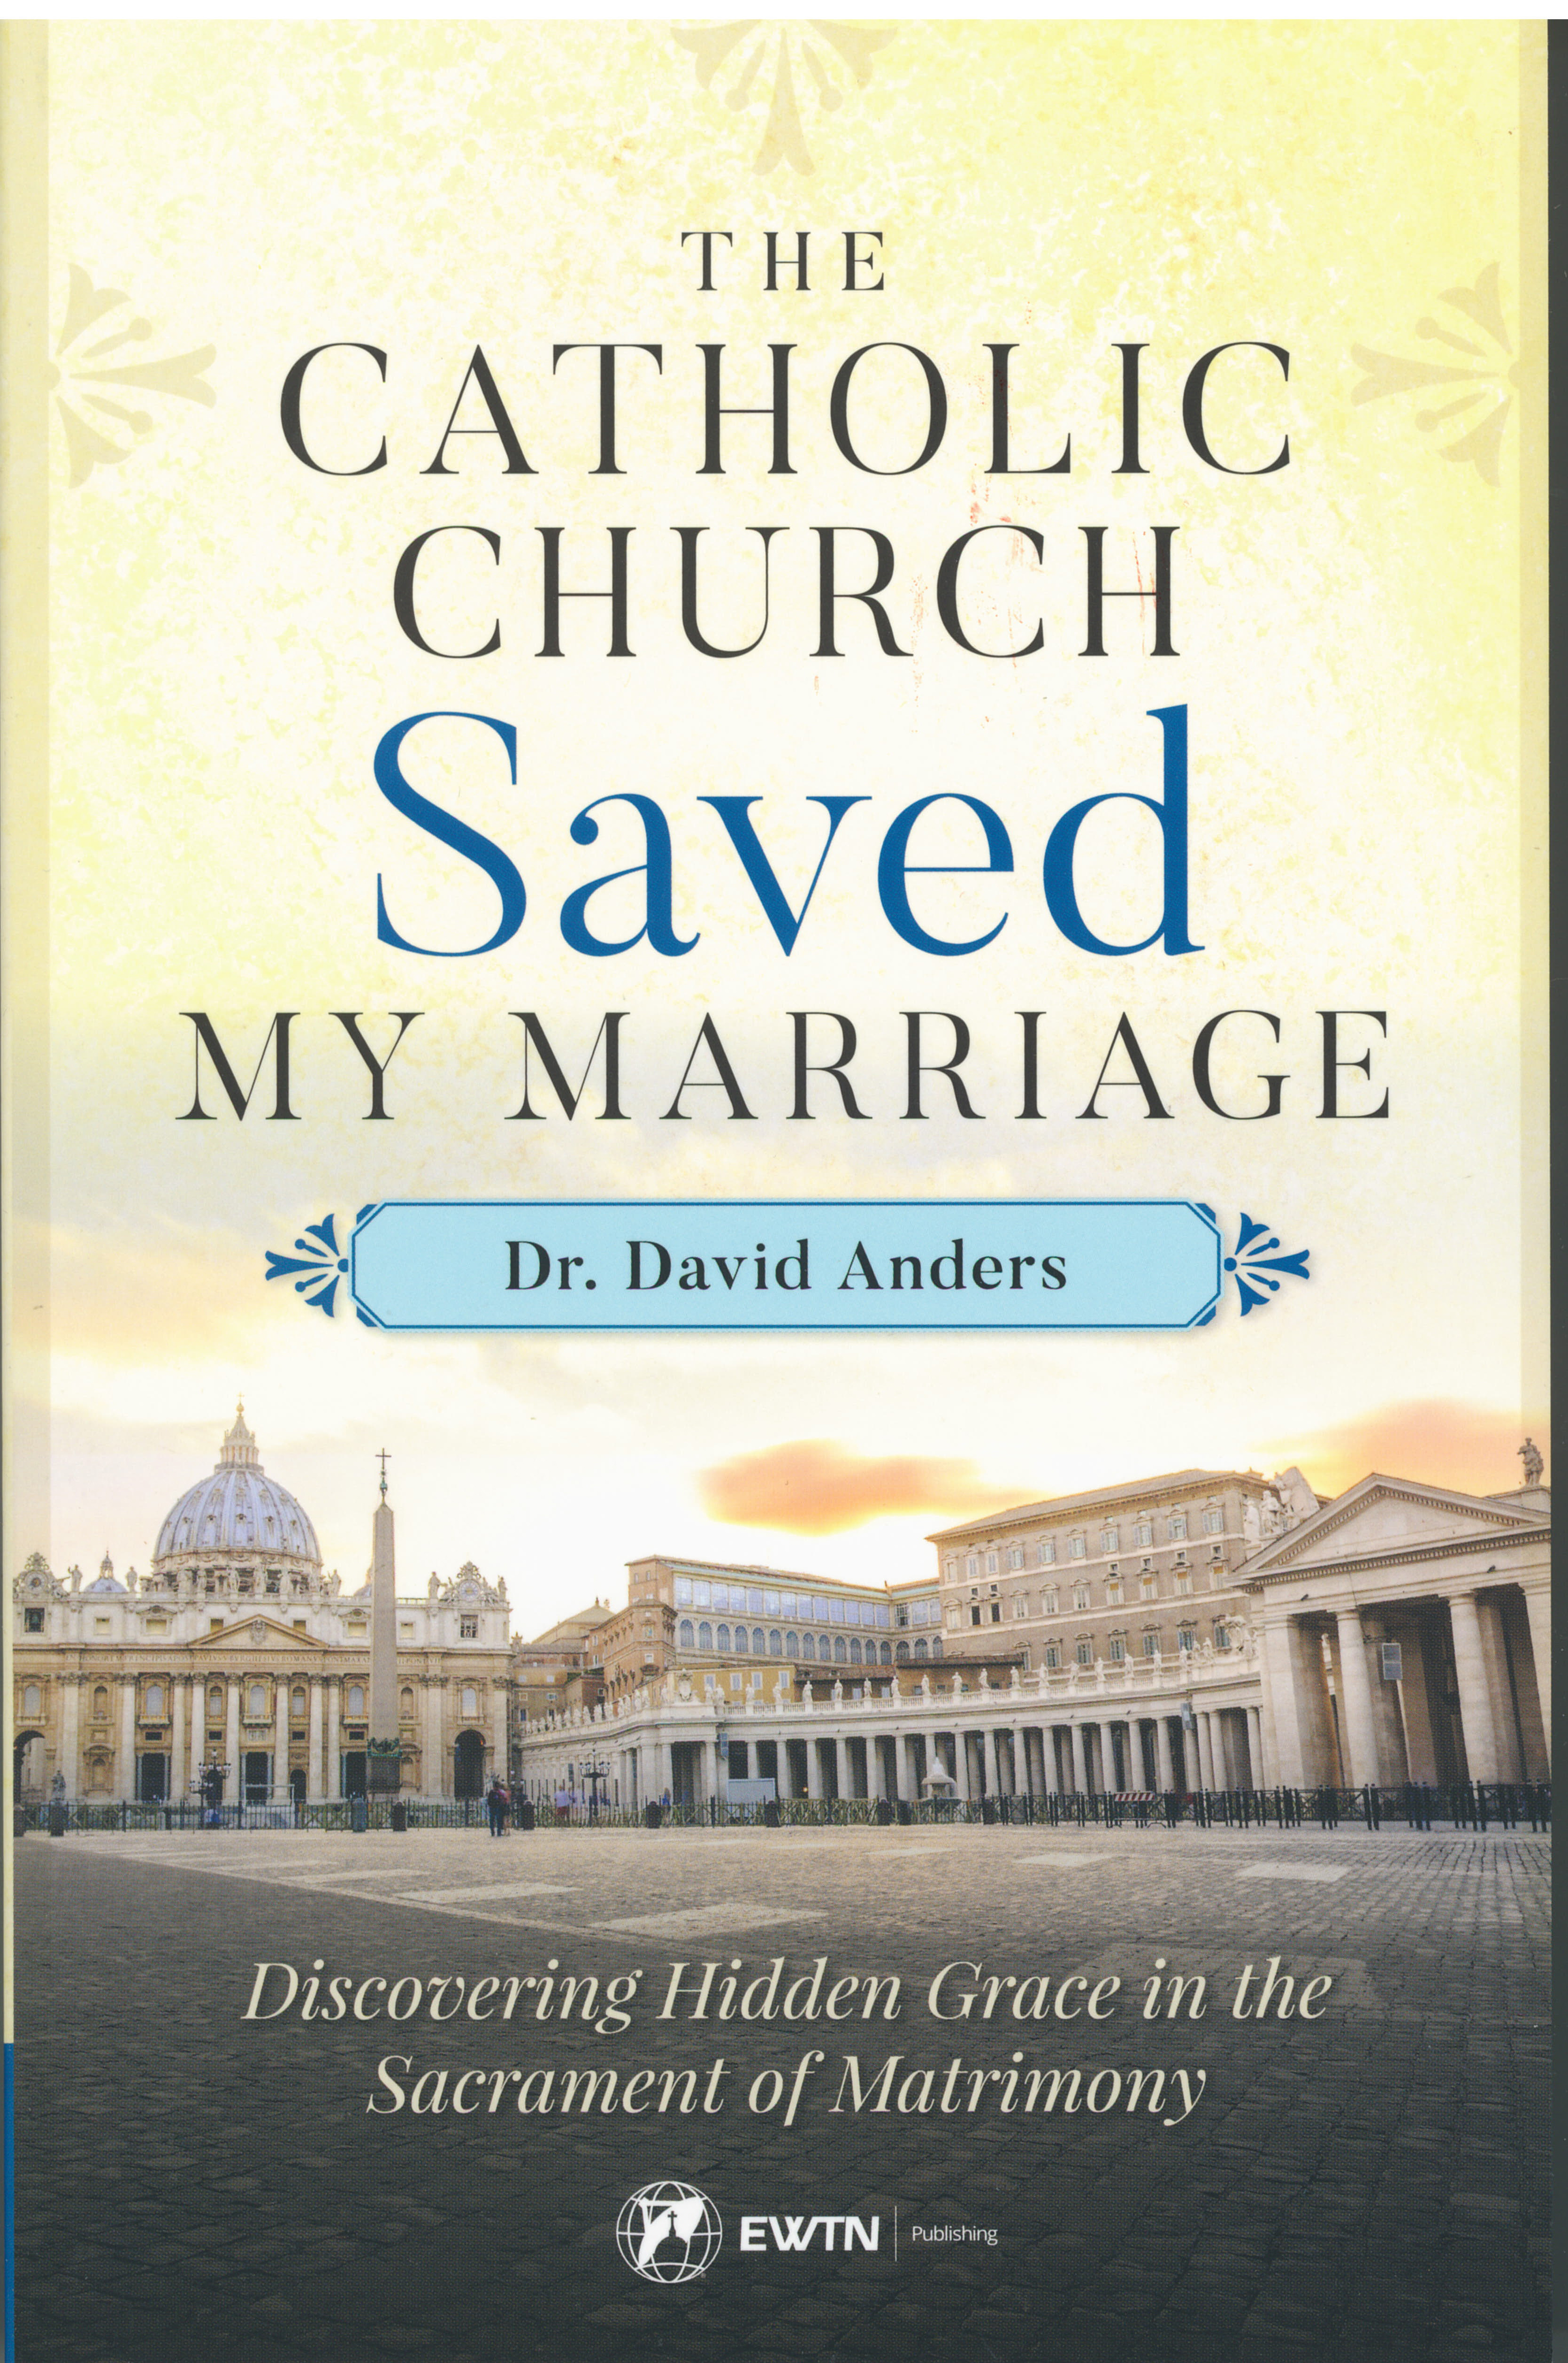 The Catholic Church Saved My Marriage: Discovering Hidden Grace in the Sacrament of Matrimony by Dr. David Anders 9781682780527